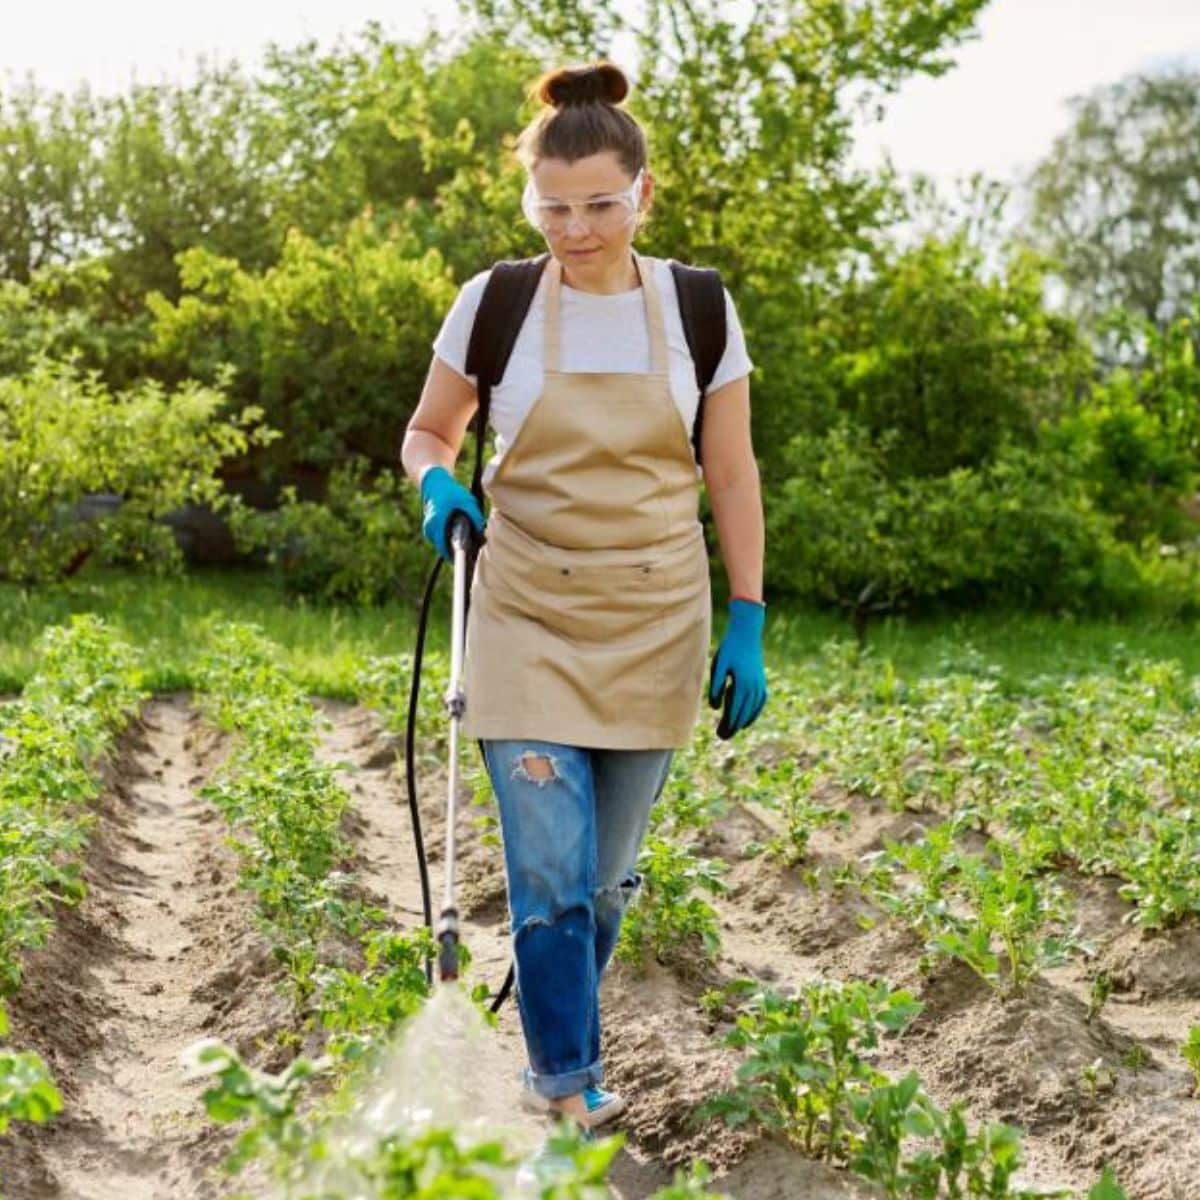 Woman gardener with pressure sprayer backpack spraying young potato plants in spring vegetable garden.